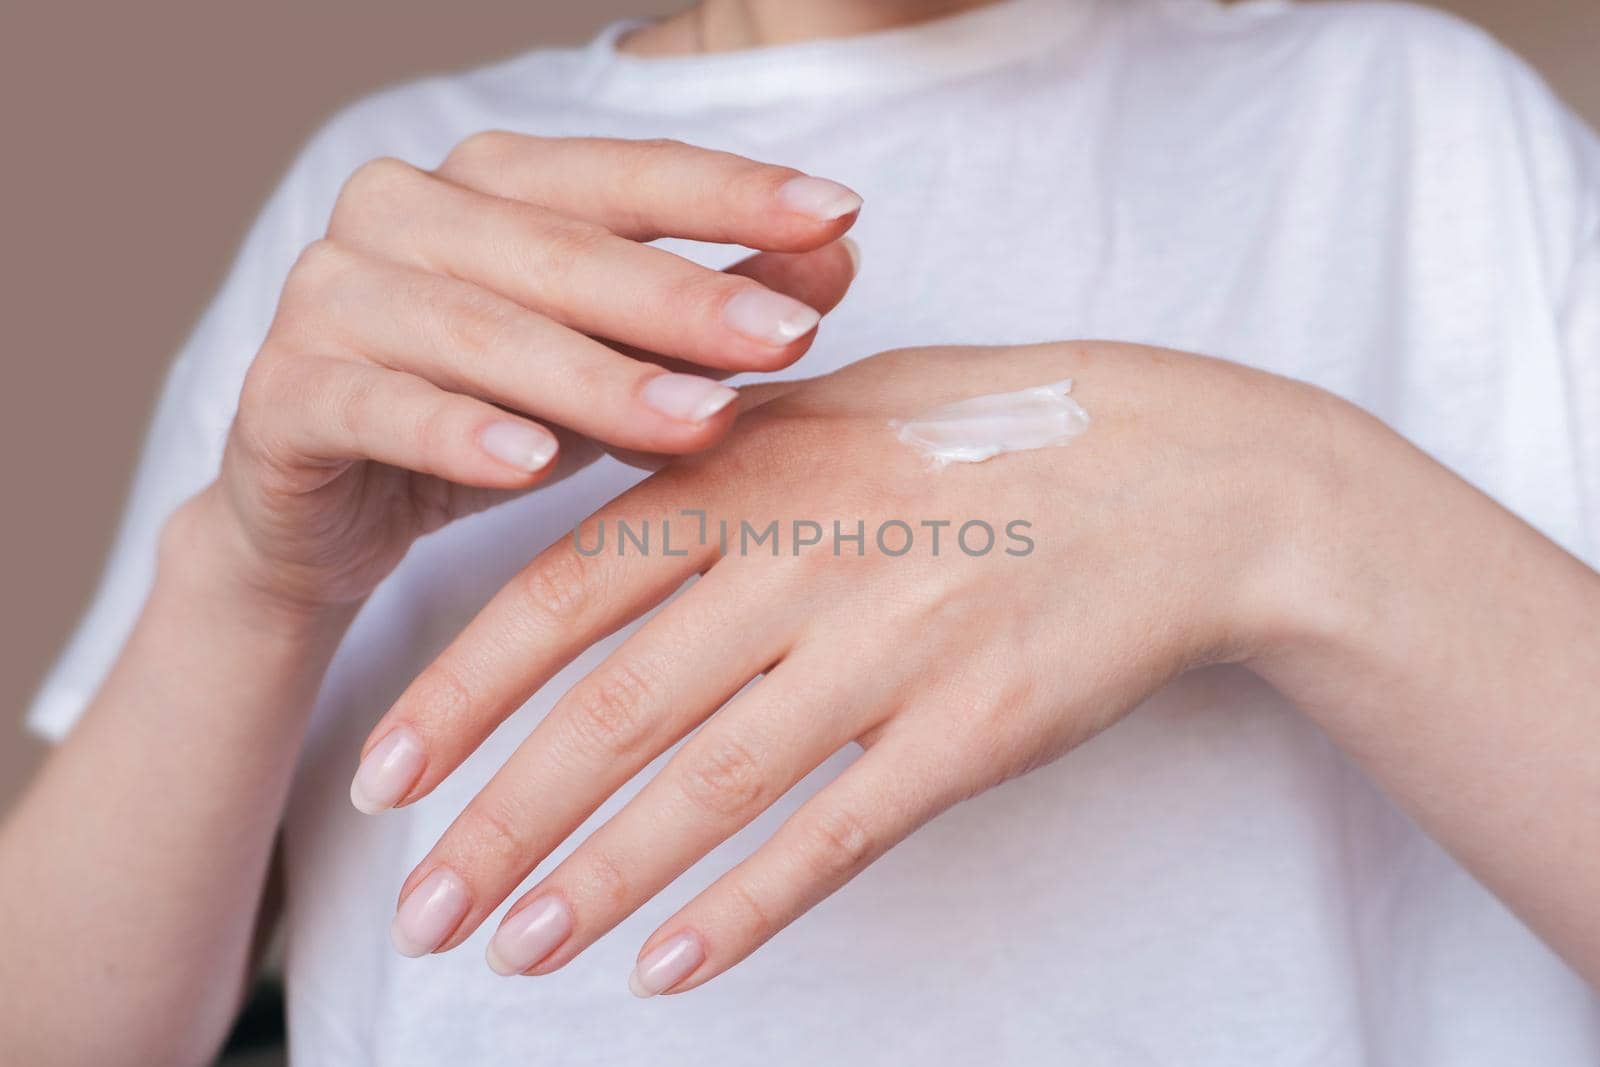 Female hands with natural pink manicure applying moisturizing cream or lotion on beige background. Bodycare, skin protection concept. Woman in white uses beauty product. Spa procedure closeup.